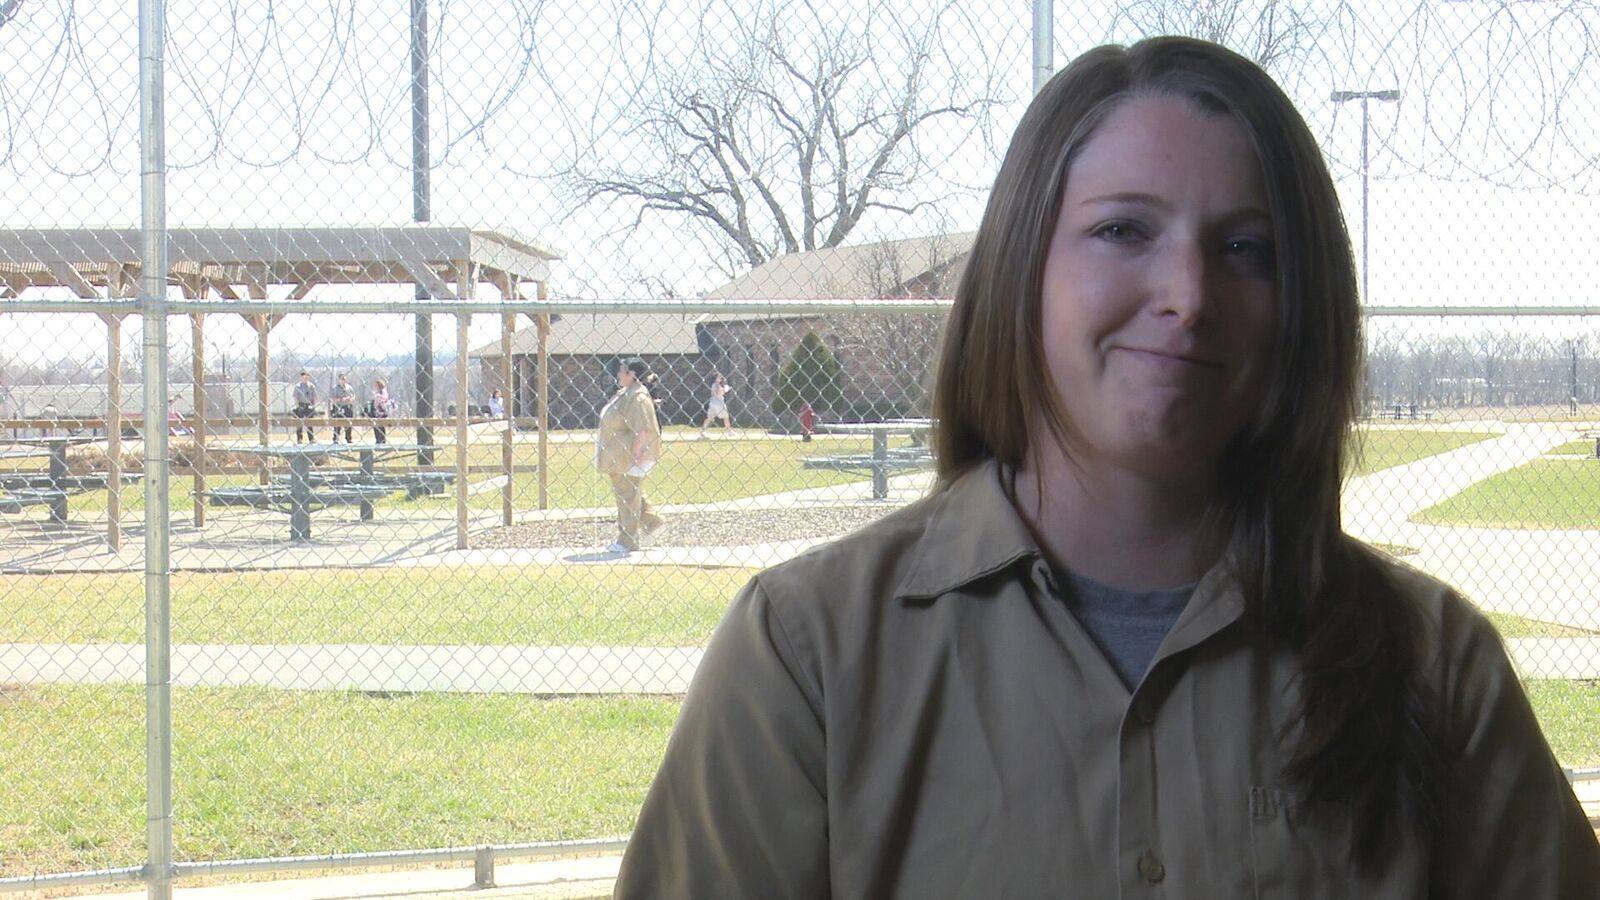 Blair found out who she was in Christ while she was incarcerated.